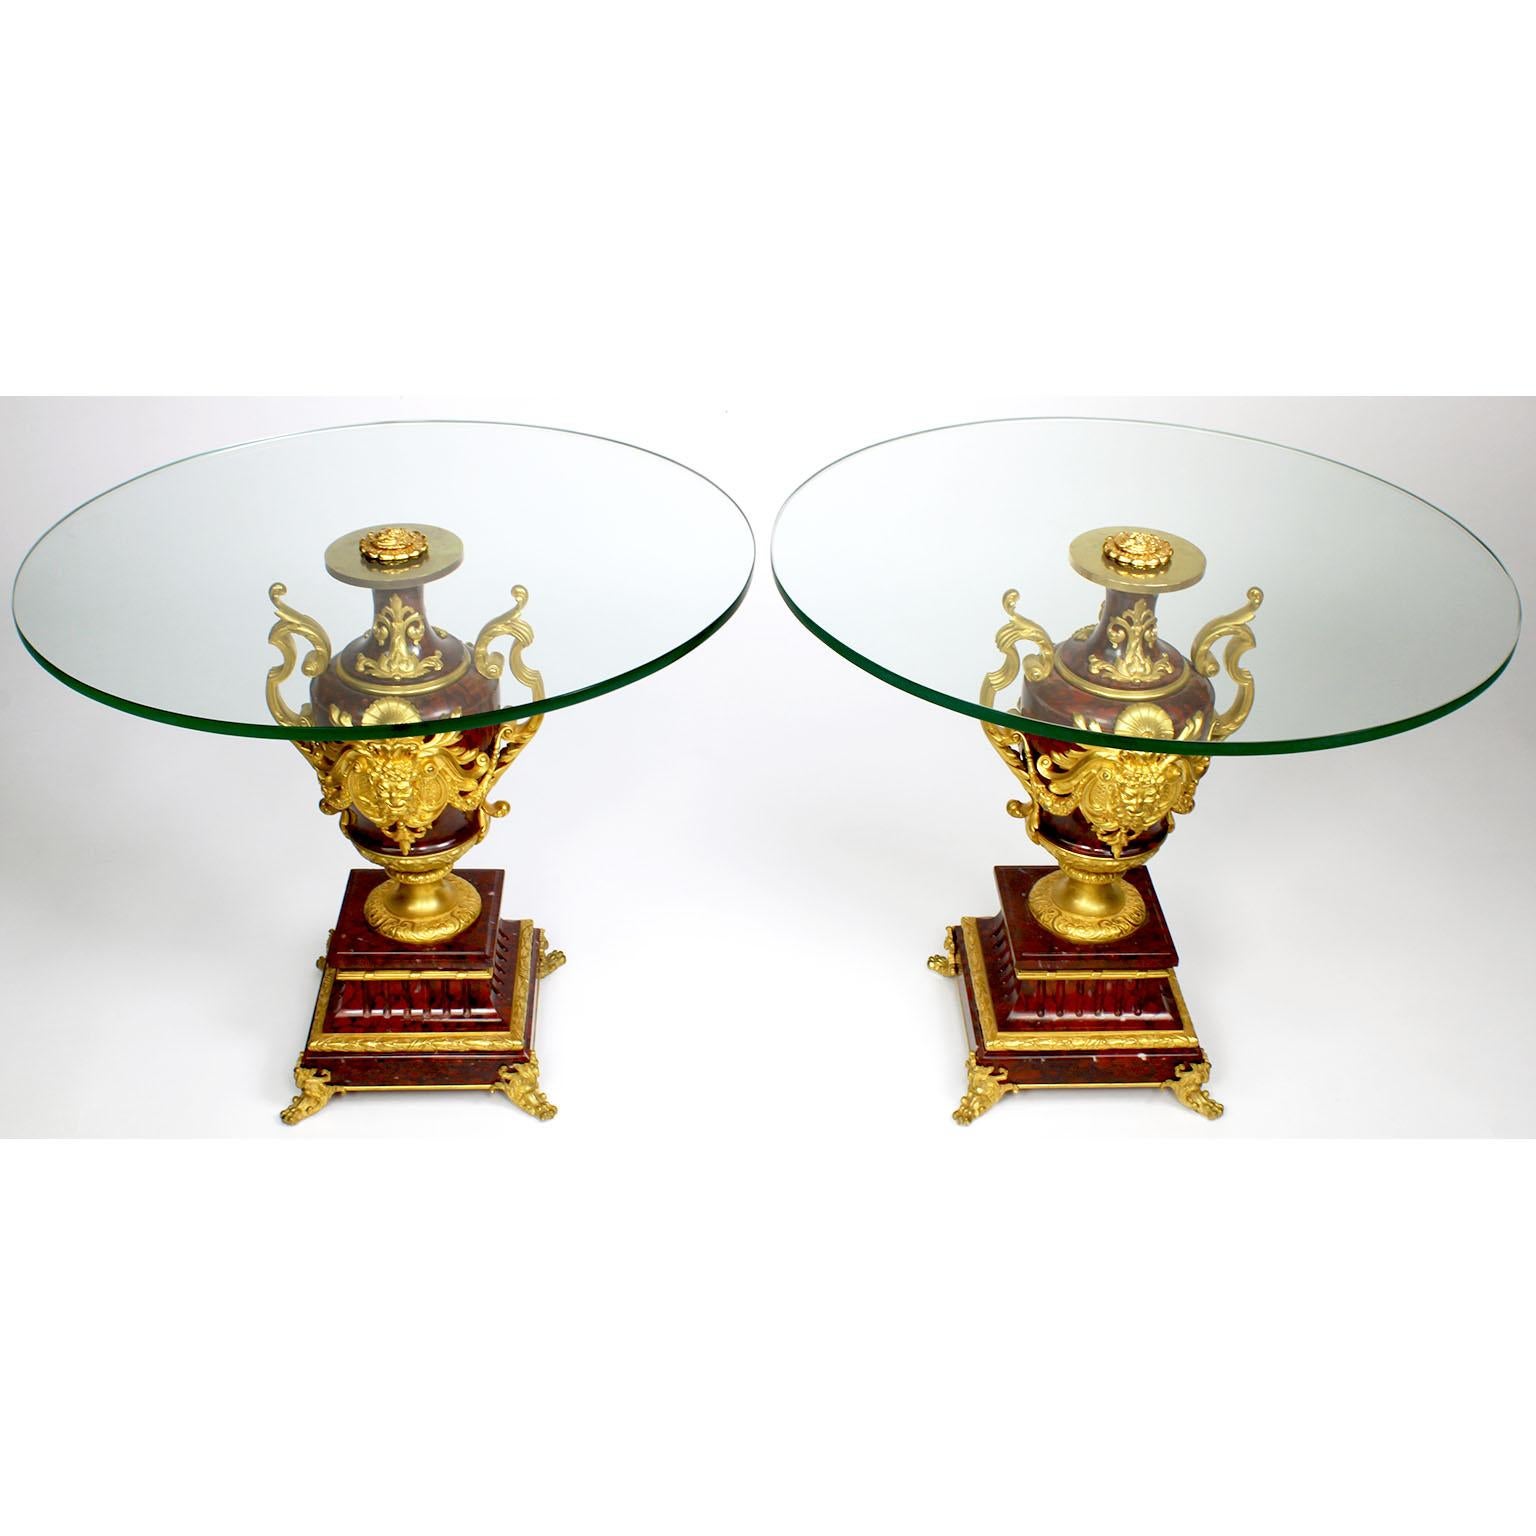 A fine pair of French Louis XV style Ormolu Mounted Rouge Griotte marble urns by Ferdinand Barbedienne (French, 1810-1892), now converted to low side tables with glass tops. The ovoid shaped urns surmounted with finely chased allegorical ormolu male